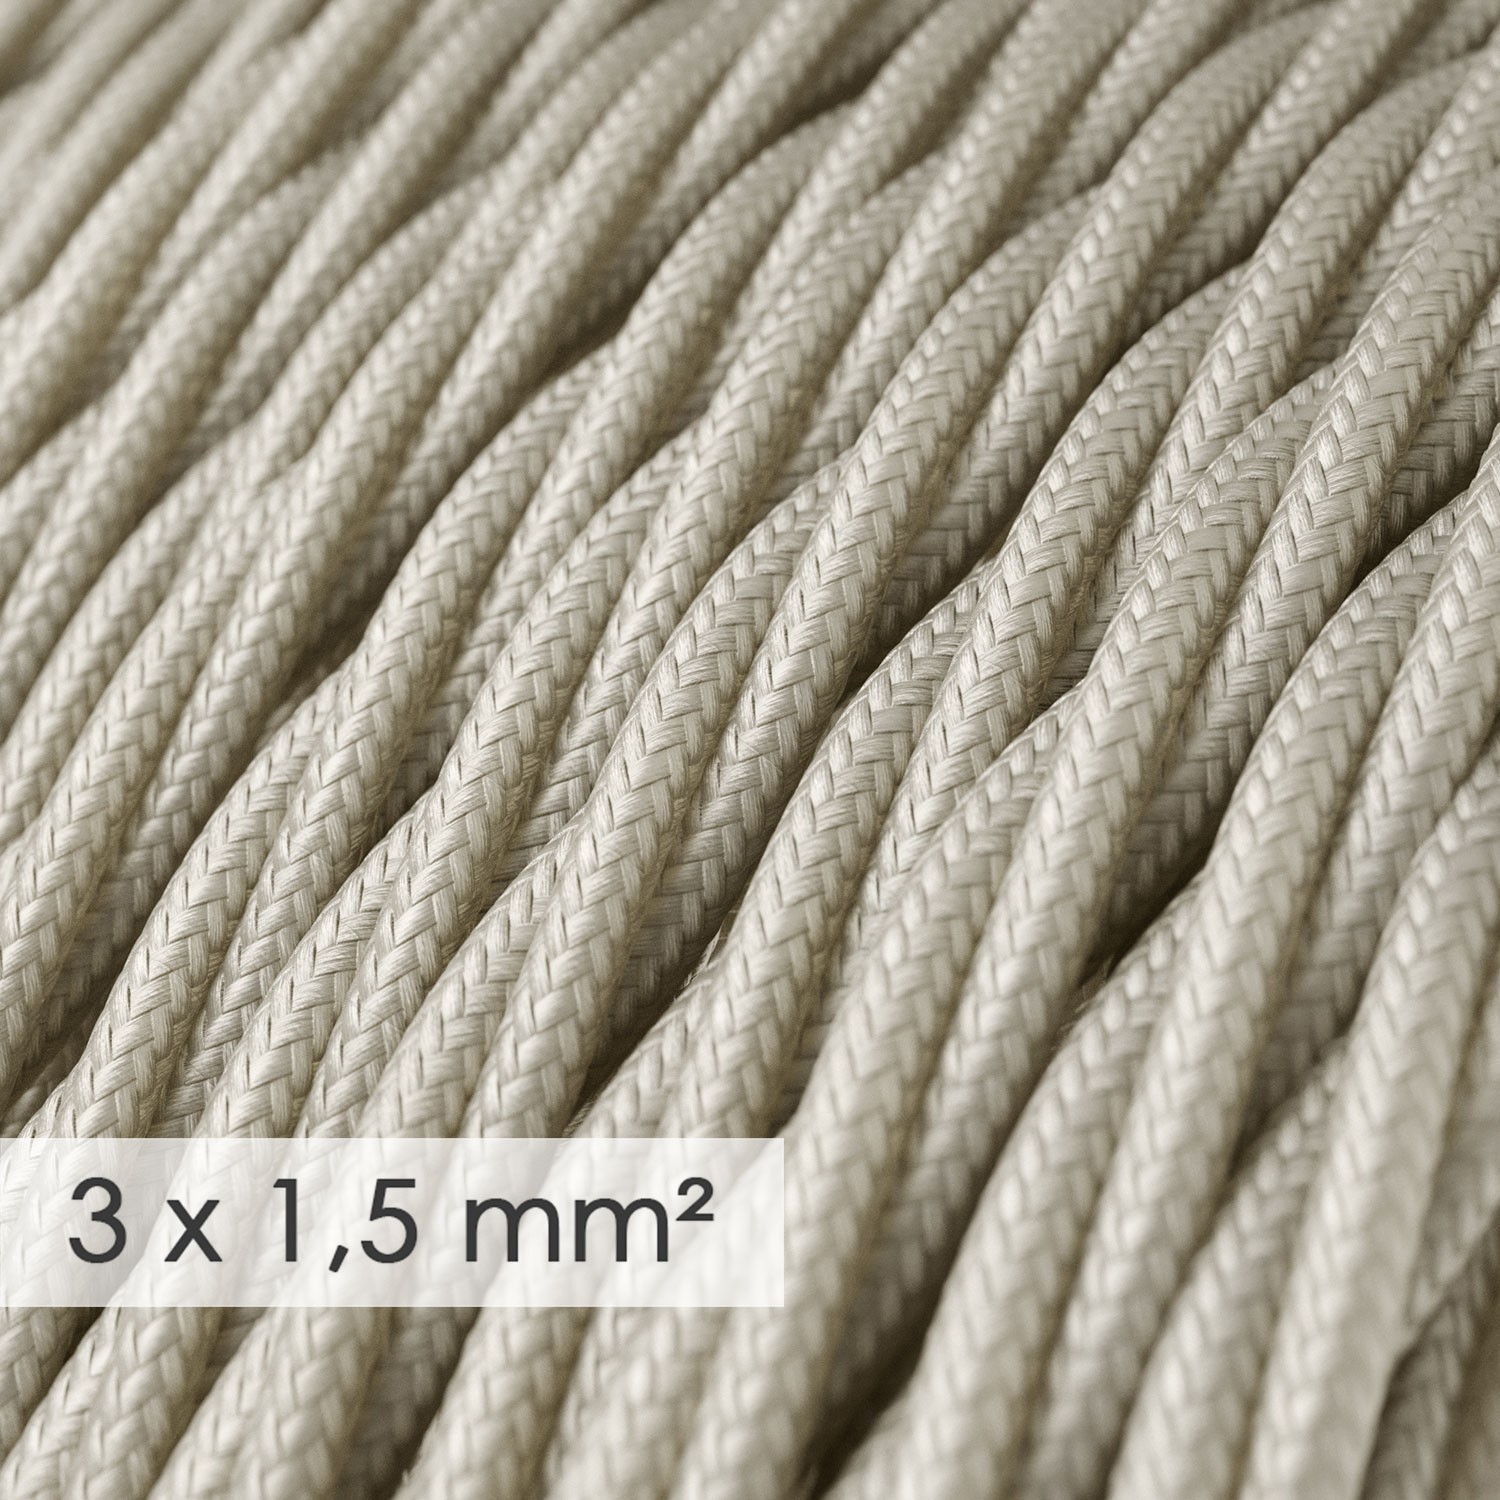 Large section electric cable 3x1,50 twisted - covered by rayon Ivory TM00